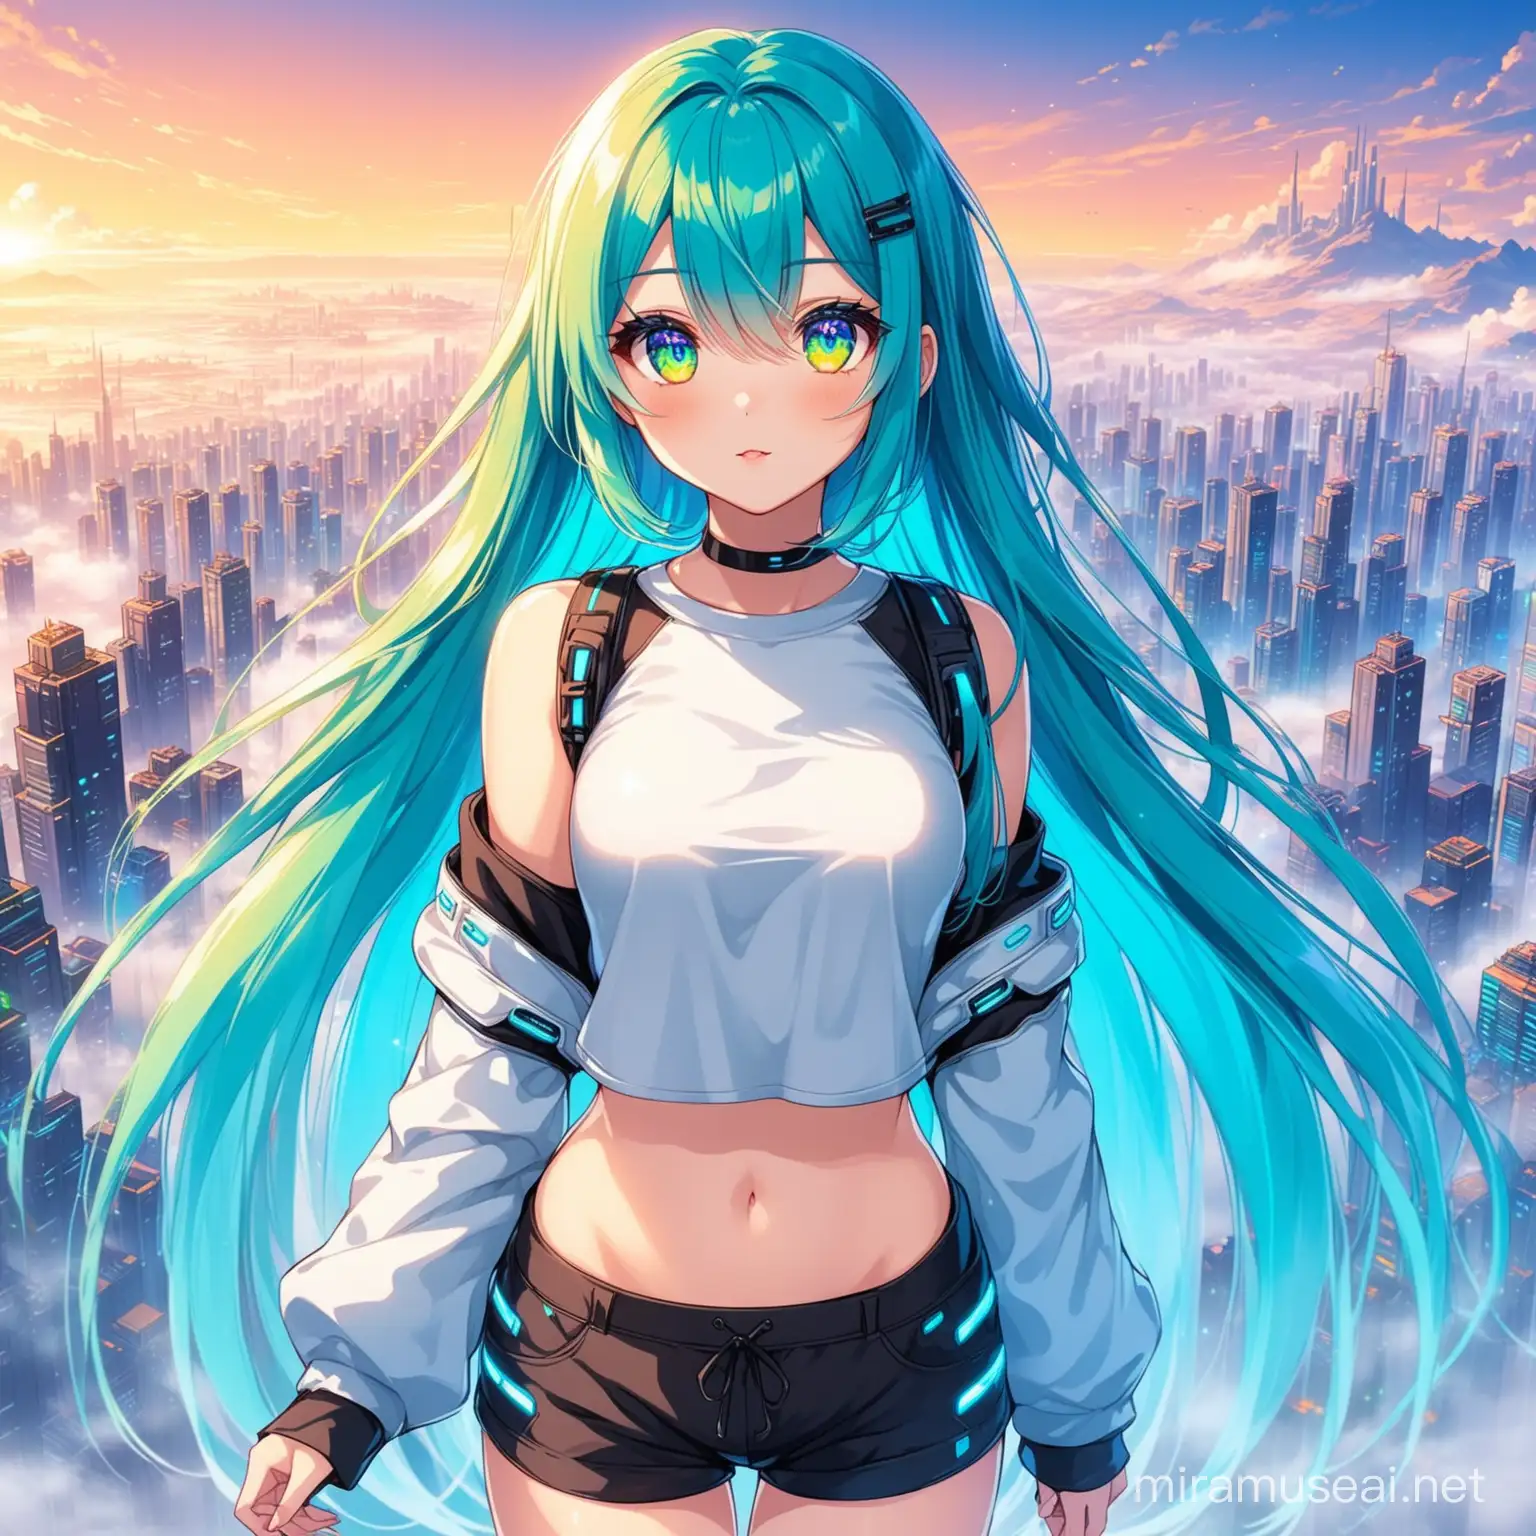 Anime Vtuber Girl with Colorful Hair in Futuristic City